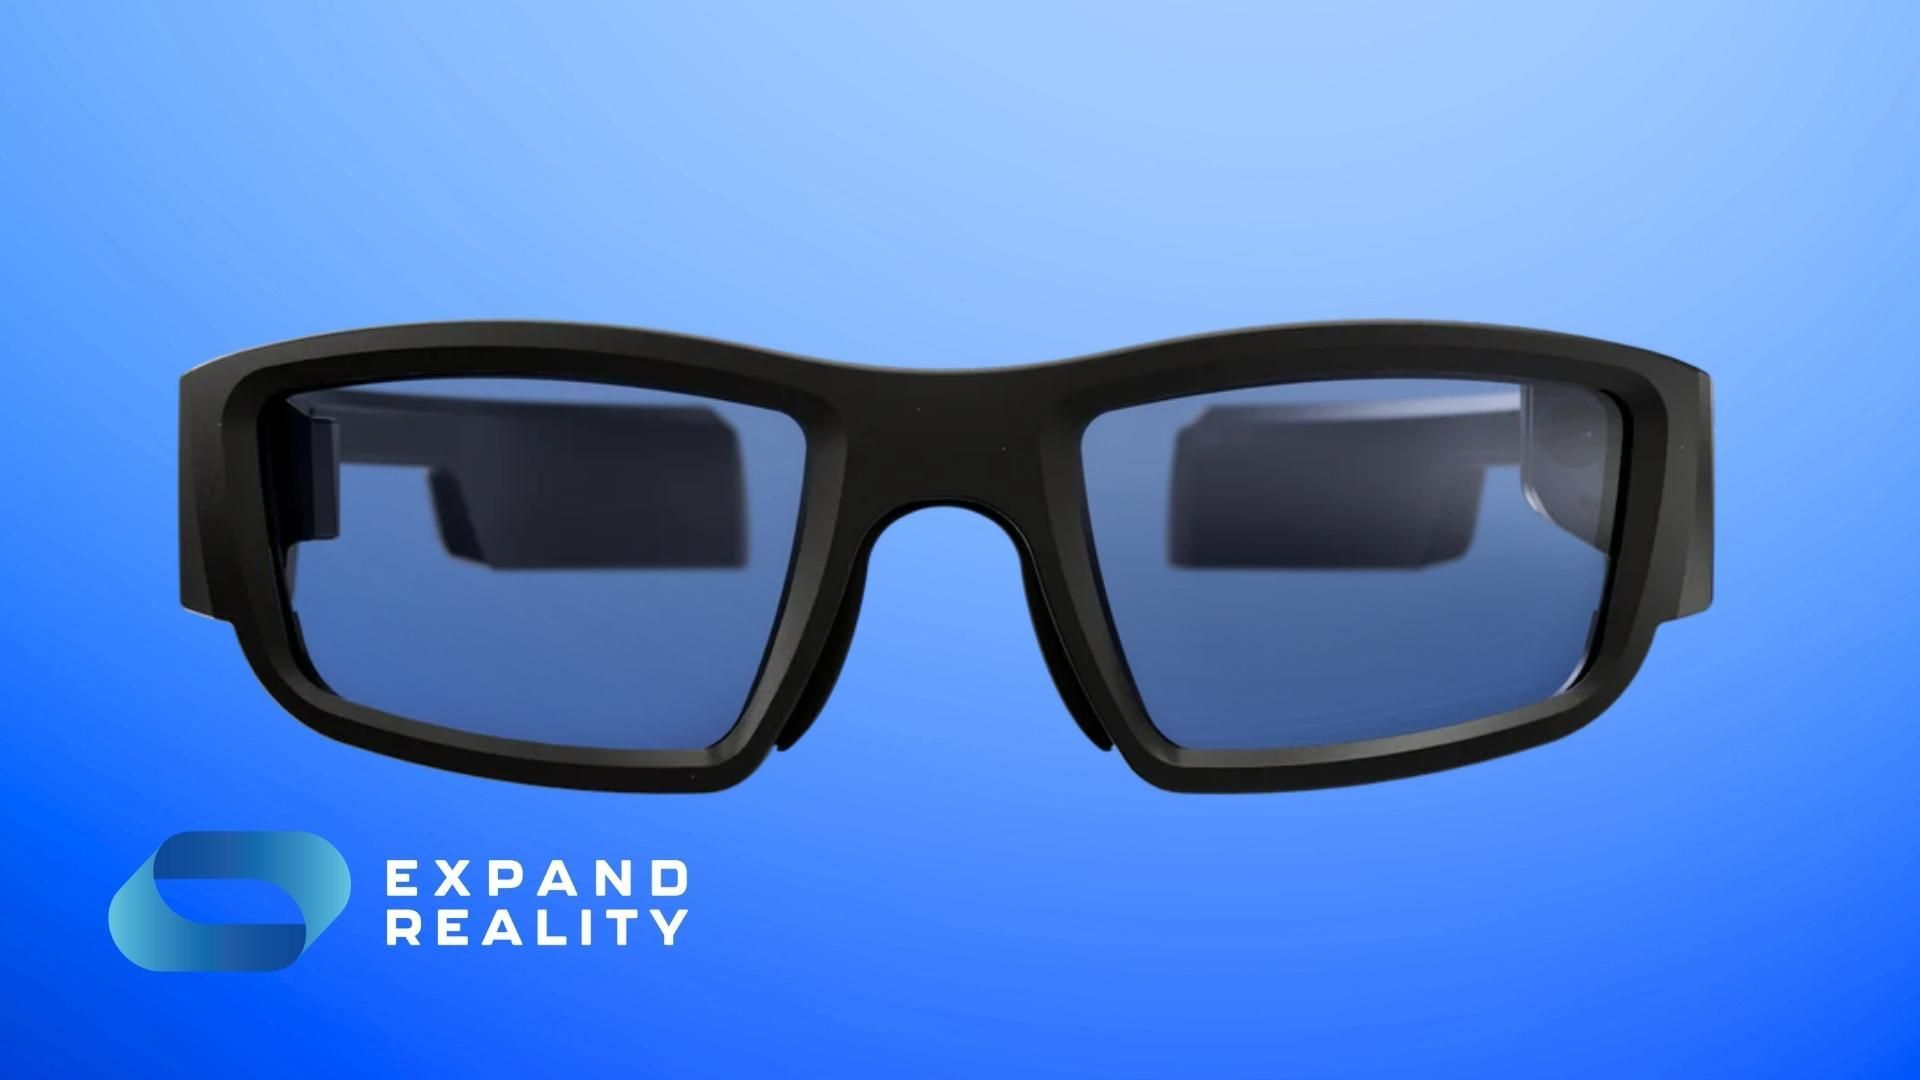 Extended reality (XR) is great for business – but that's not its only function. Join us as we explore 10 great entertainment apps for Vuzix smart glasses.